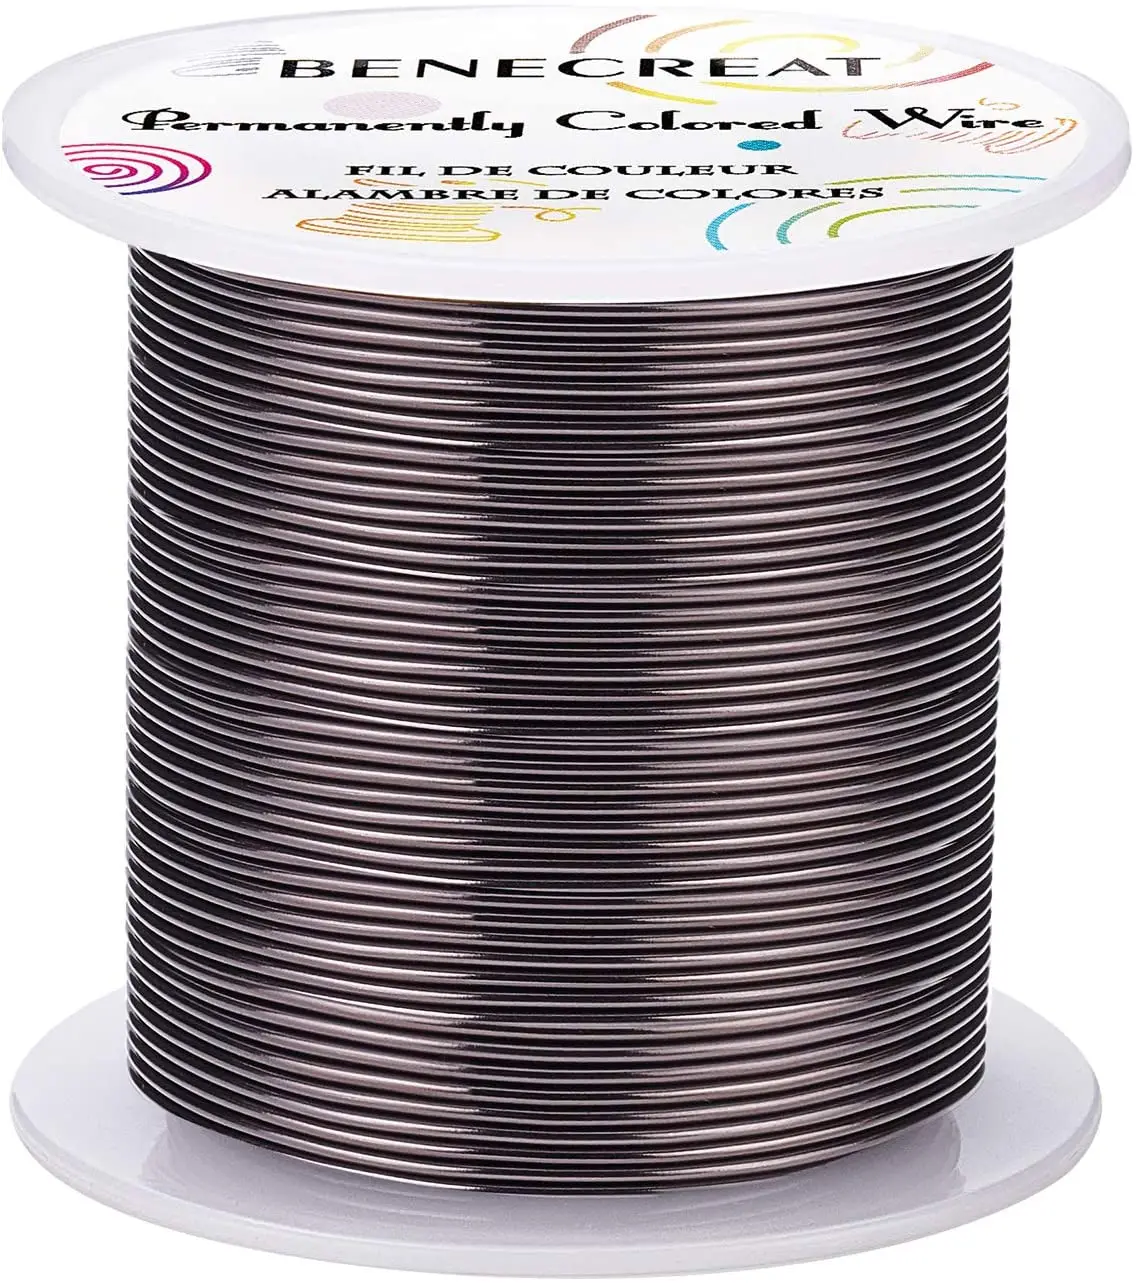  AIEX 6 Rolls 26 Gauge Tarnish Resistant Bare Copper Jewelry  Wire for Crafts Beading Jewelry Making Supplies